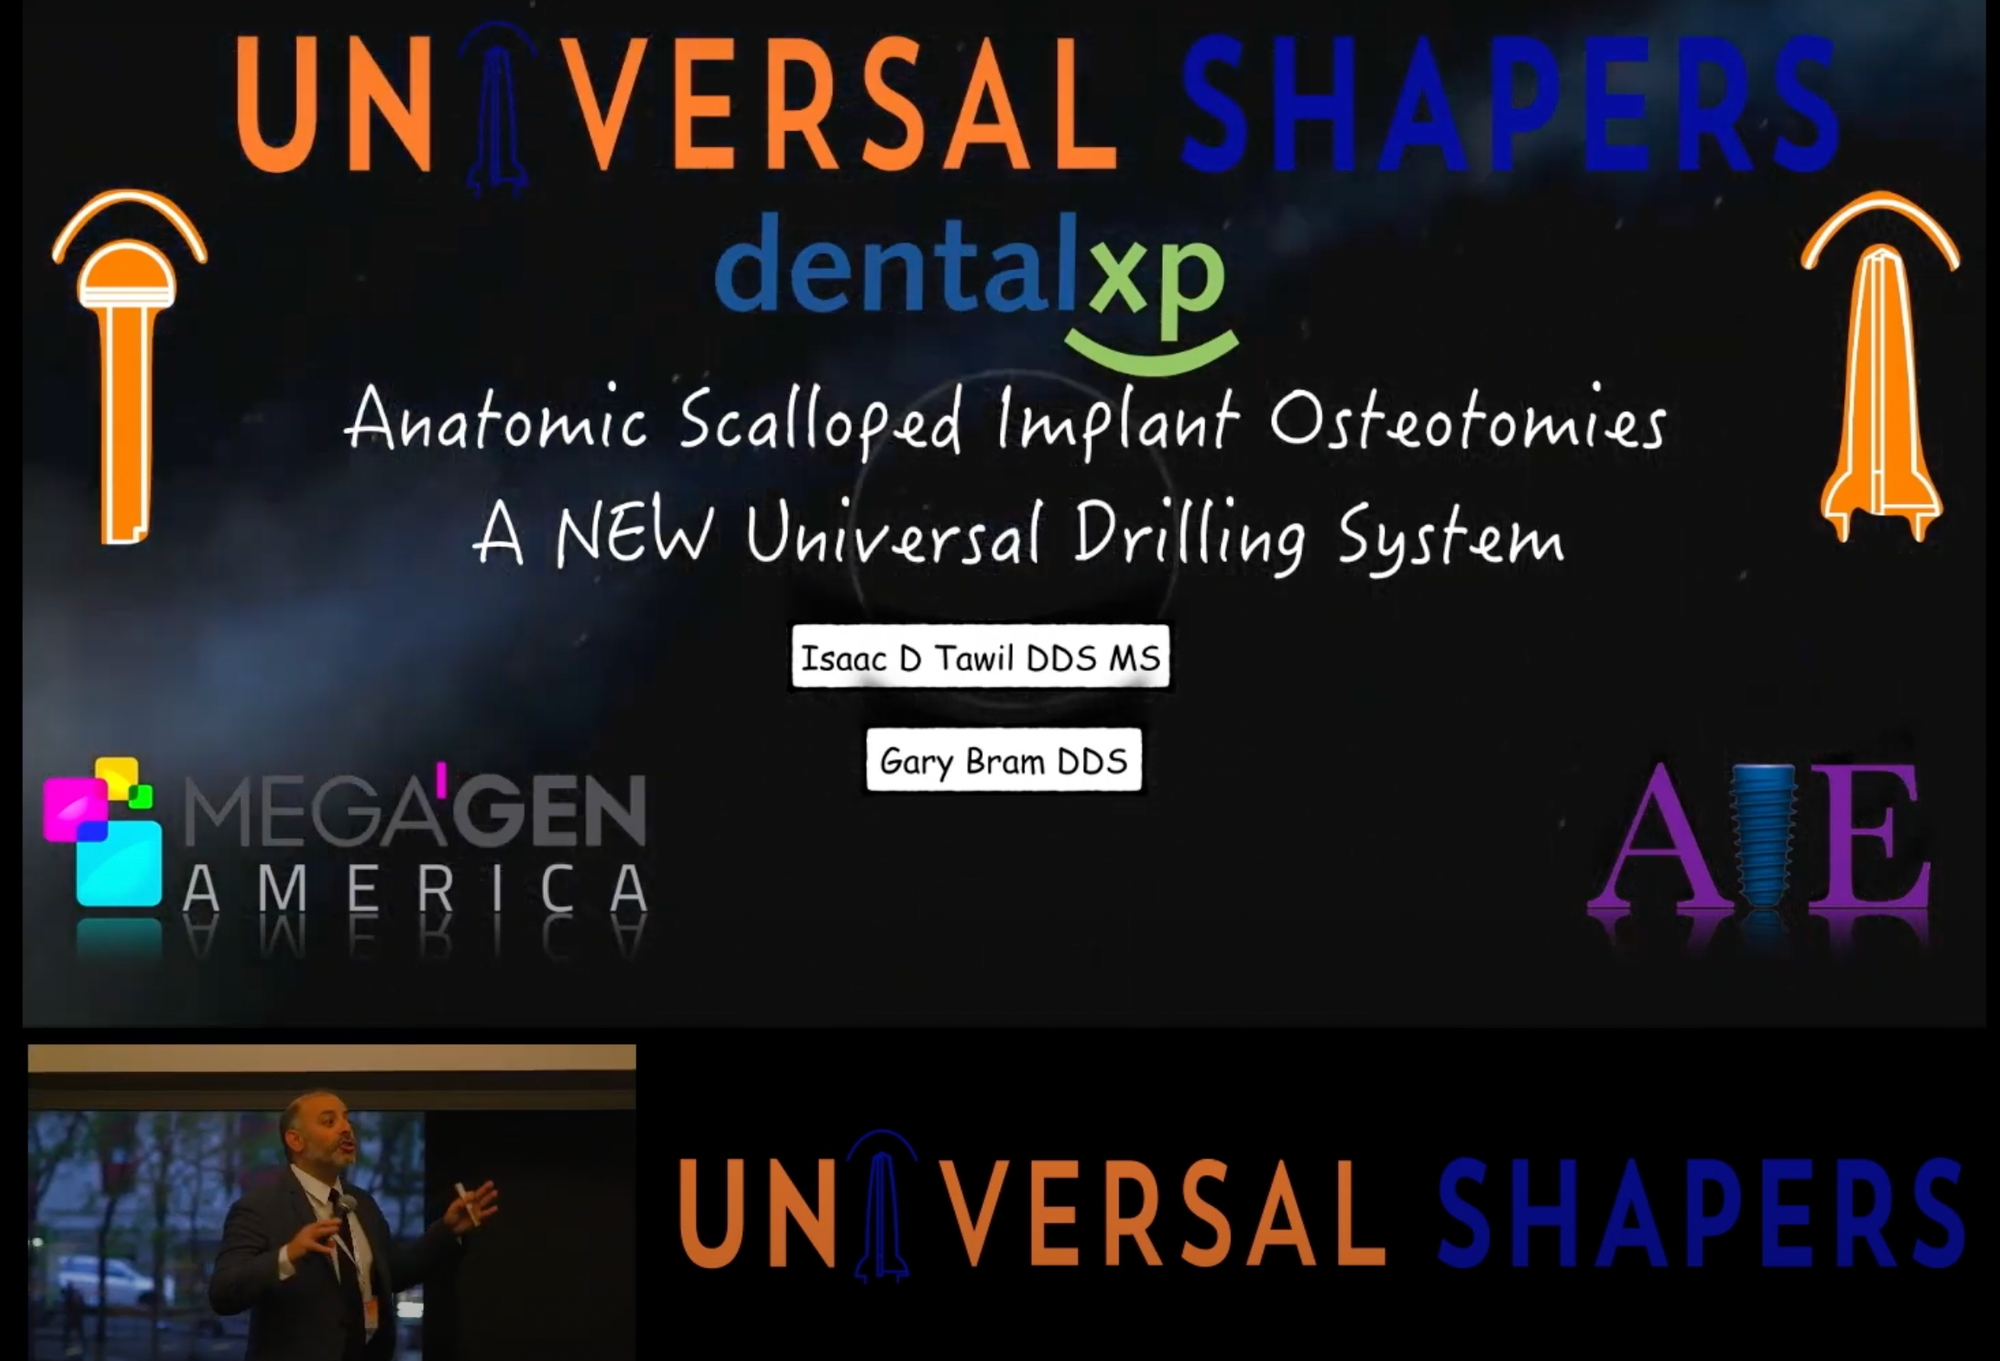 "Anatomic Scalloped Implant Osteotomies": Introducing a NEW Universal Drilling system